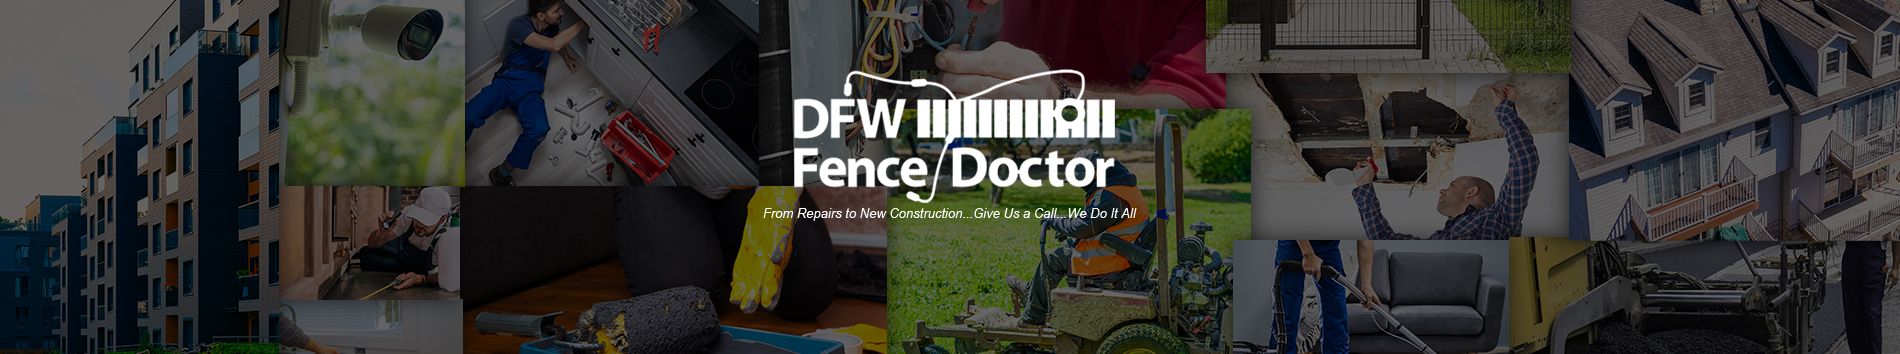 DFW Fence Doctor